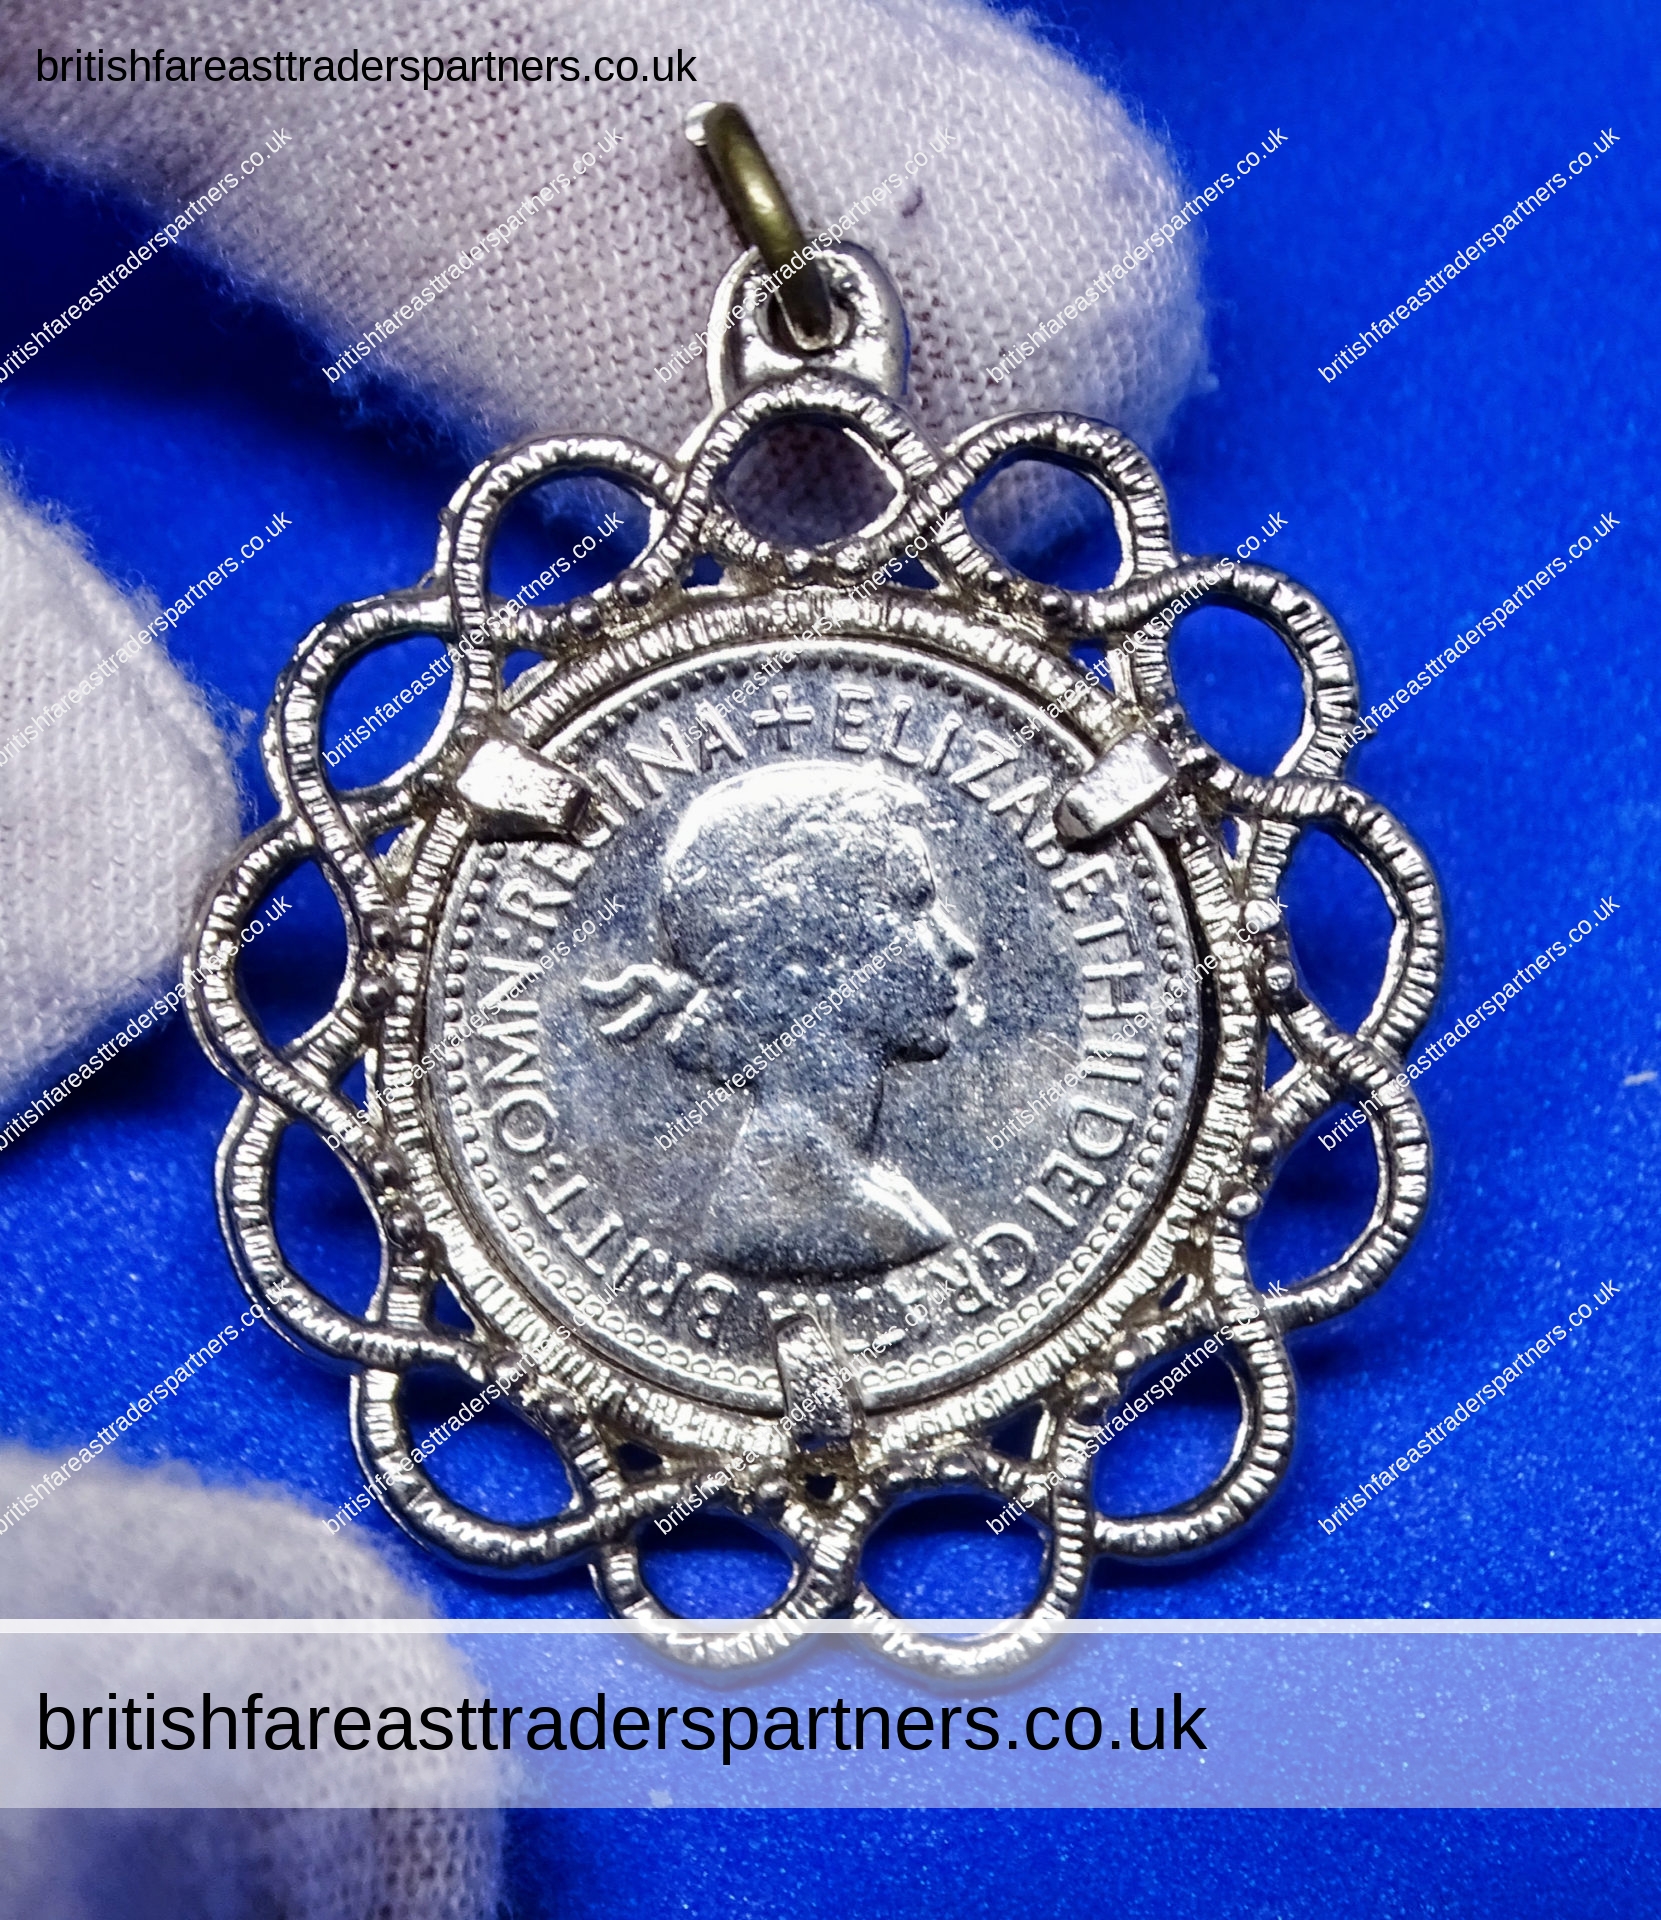 VINTAGE 1953 SILVERTONE COIN PENDANT QUEEN ELIZABETH II SIXPENCE COIN COLLECTABLES | COSTUME JEWELLERY | BRITISH ROYALTY COLLECTABLES | FASHION | ACCESSORIES | LIFESTYLE